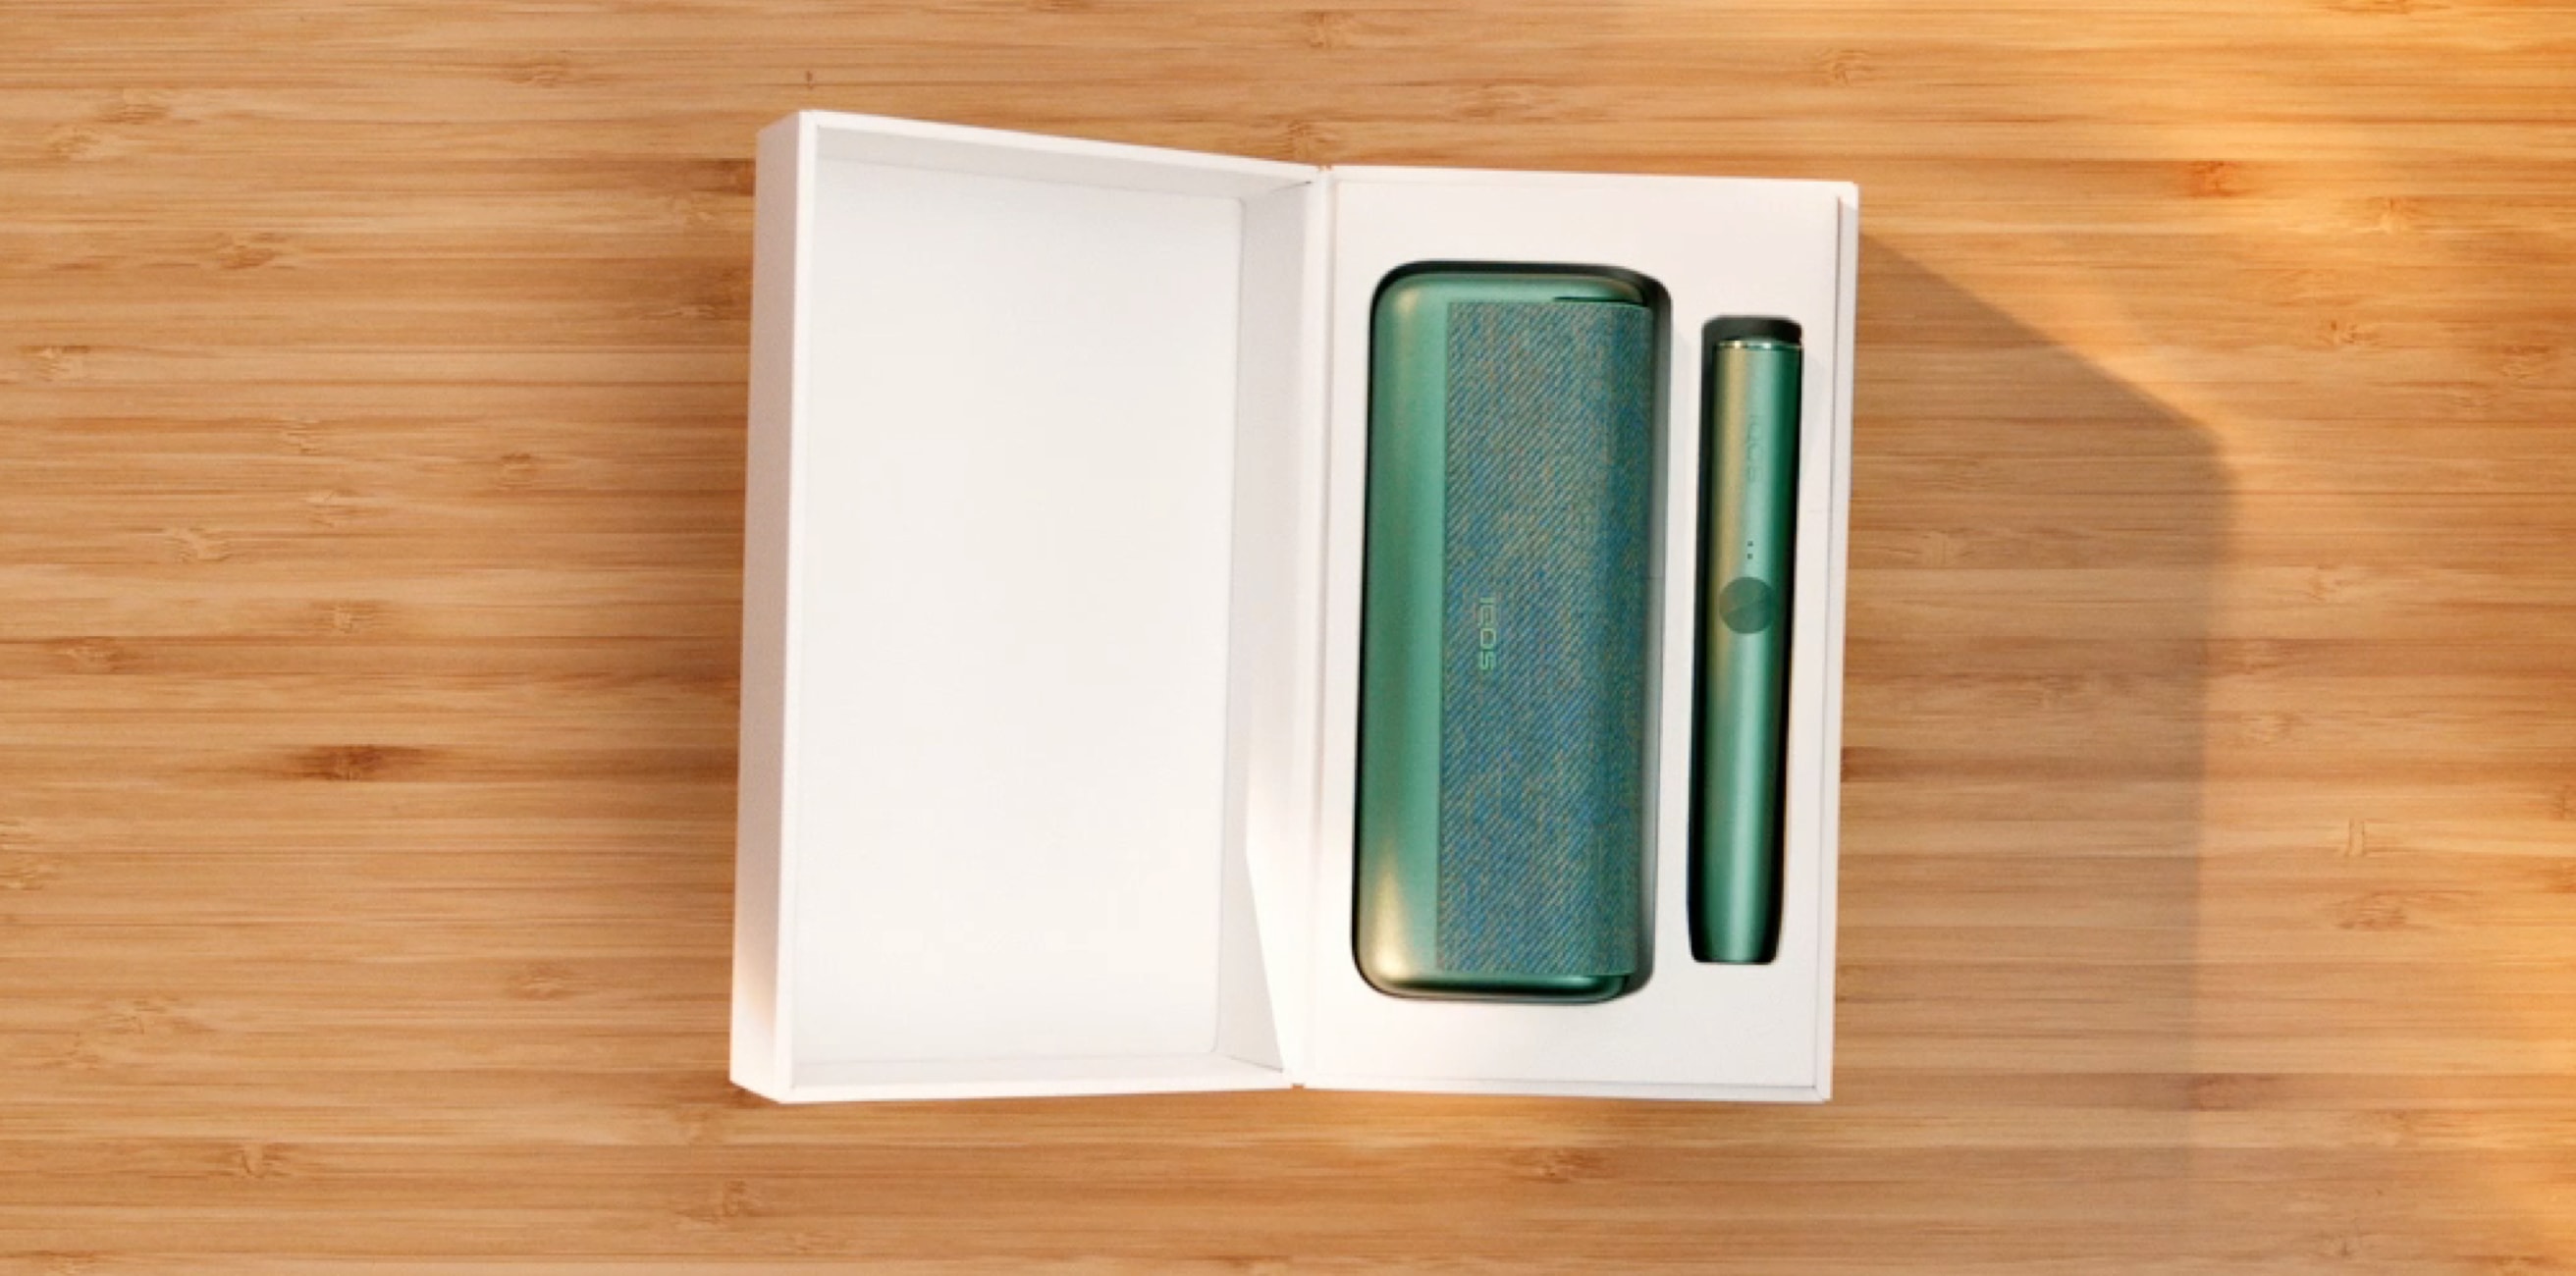 A Jade Green IQOS ILUMA PRIME holder and Pocket Charger in a box.